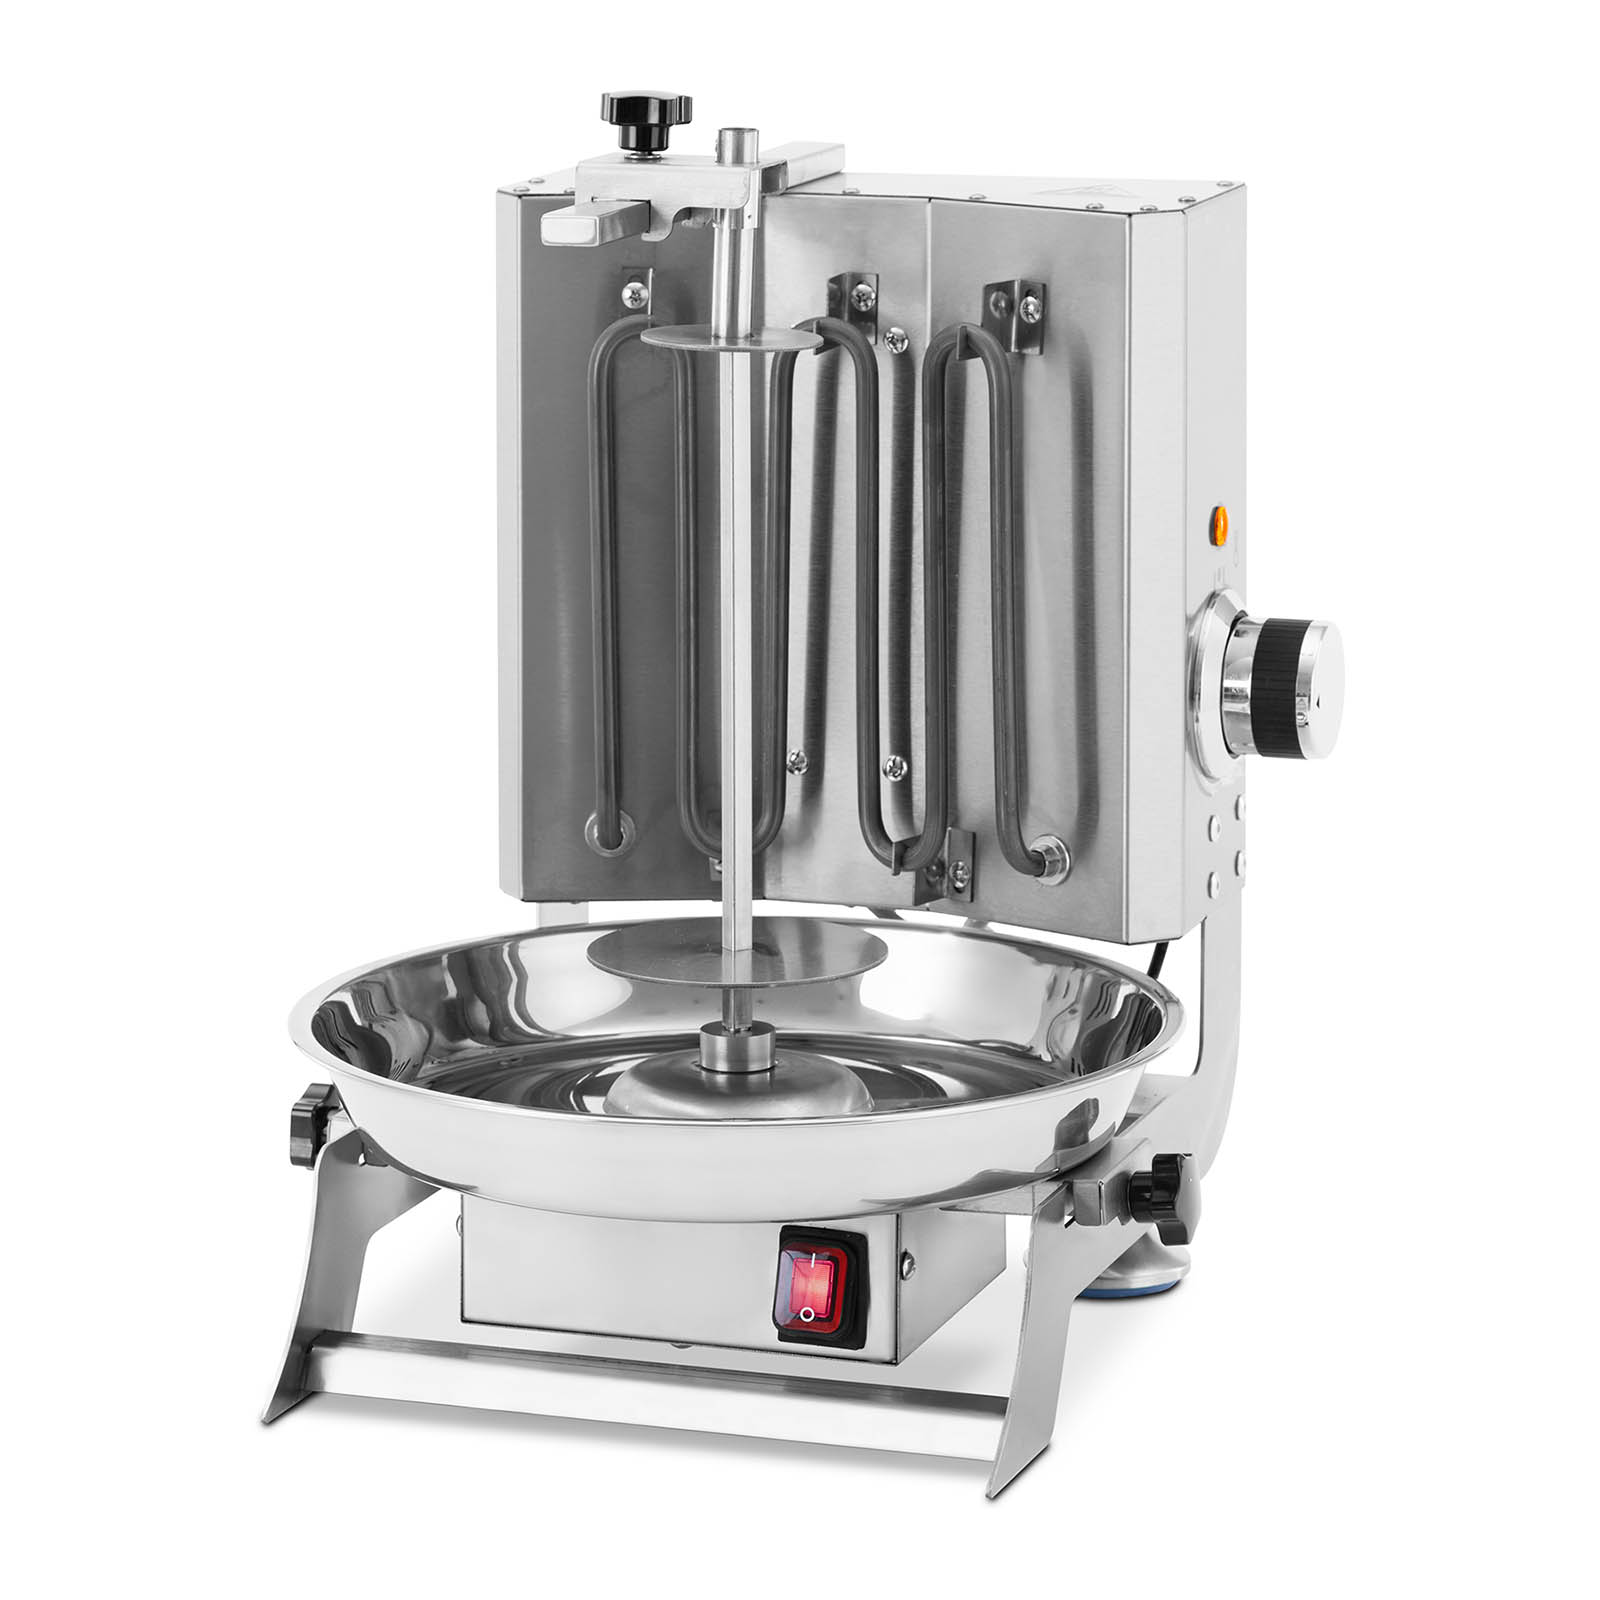 Schwarma grill - 2000 W - up to 15 kg meat - Royal Catering